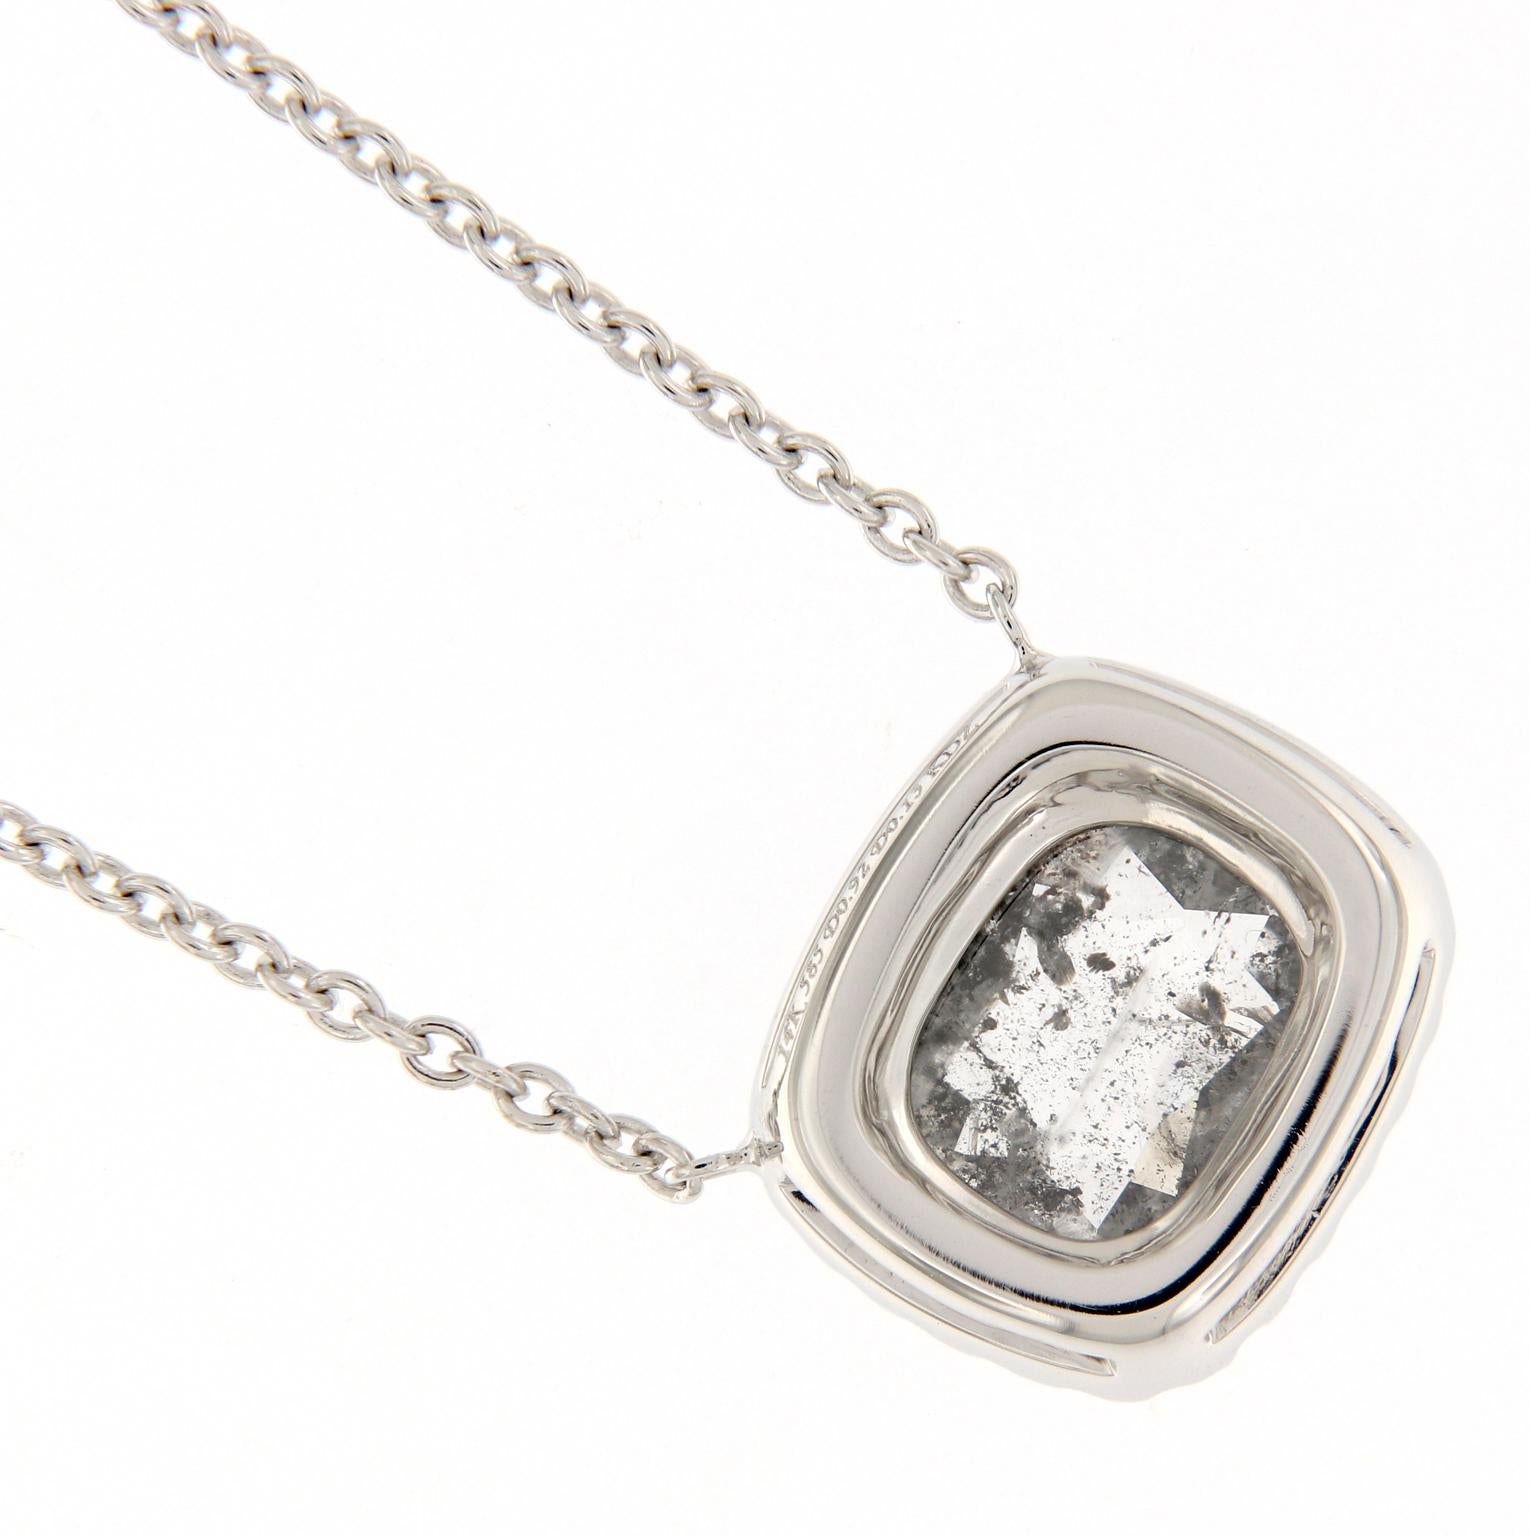 Pretty diamond halo pendant features a 0.92 carat grey, “salt and pepper” cushion rose-cut diamond. Pendant is on a 18 inch 14k white gold chain. Chain loops at 17 and 16 inches also. Weighs 3 grams.

White Diamonds 0.13 cttw.
Grey Diamond 0.92